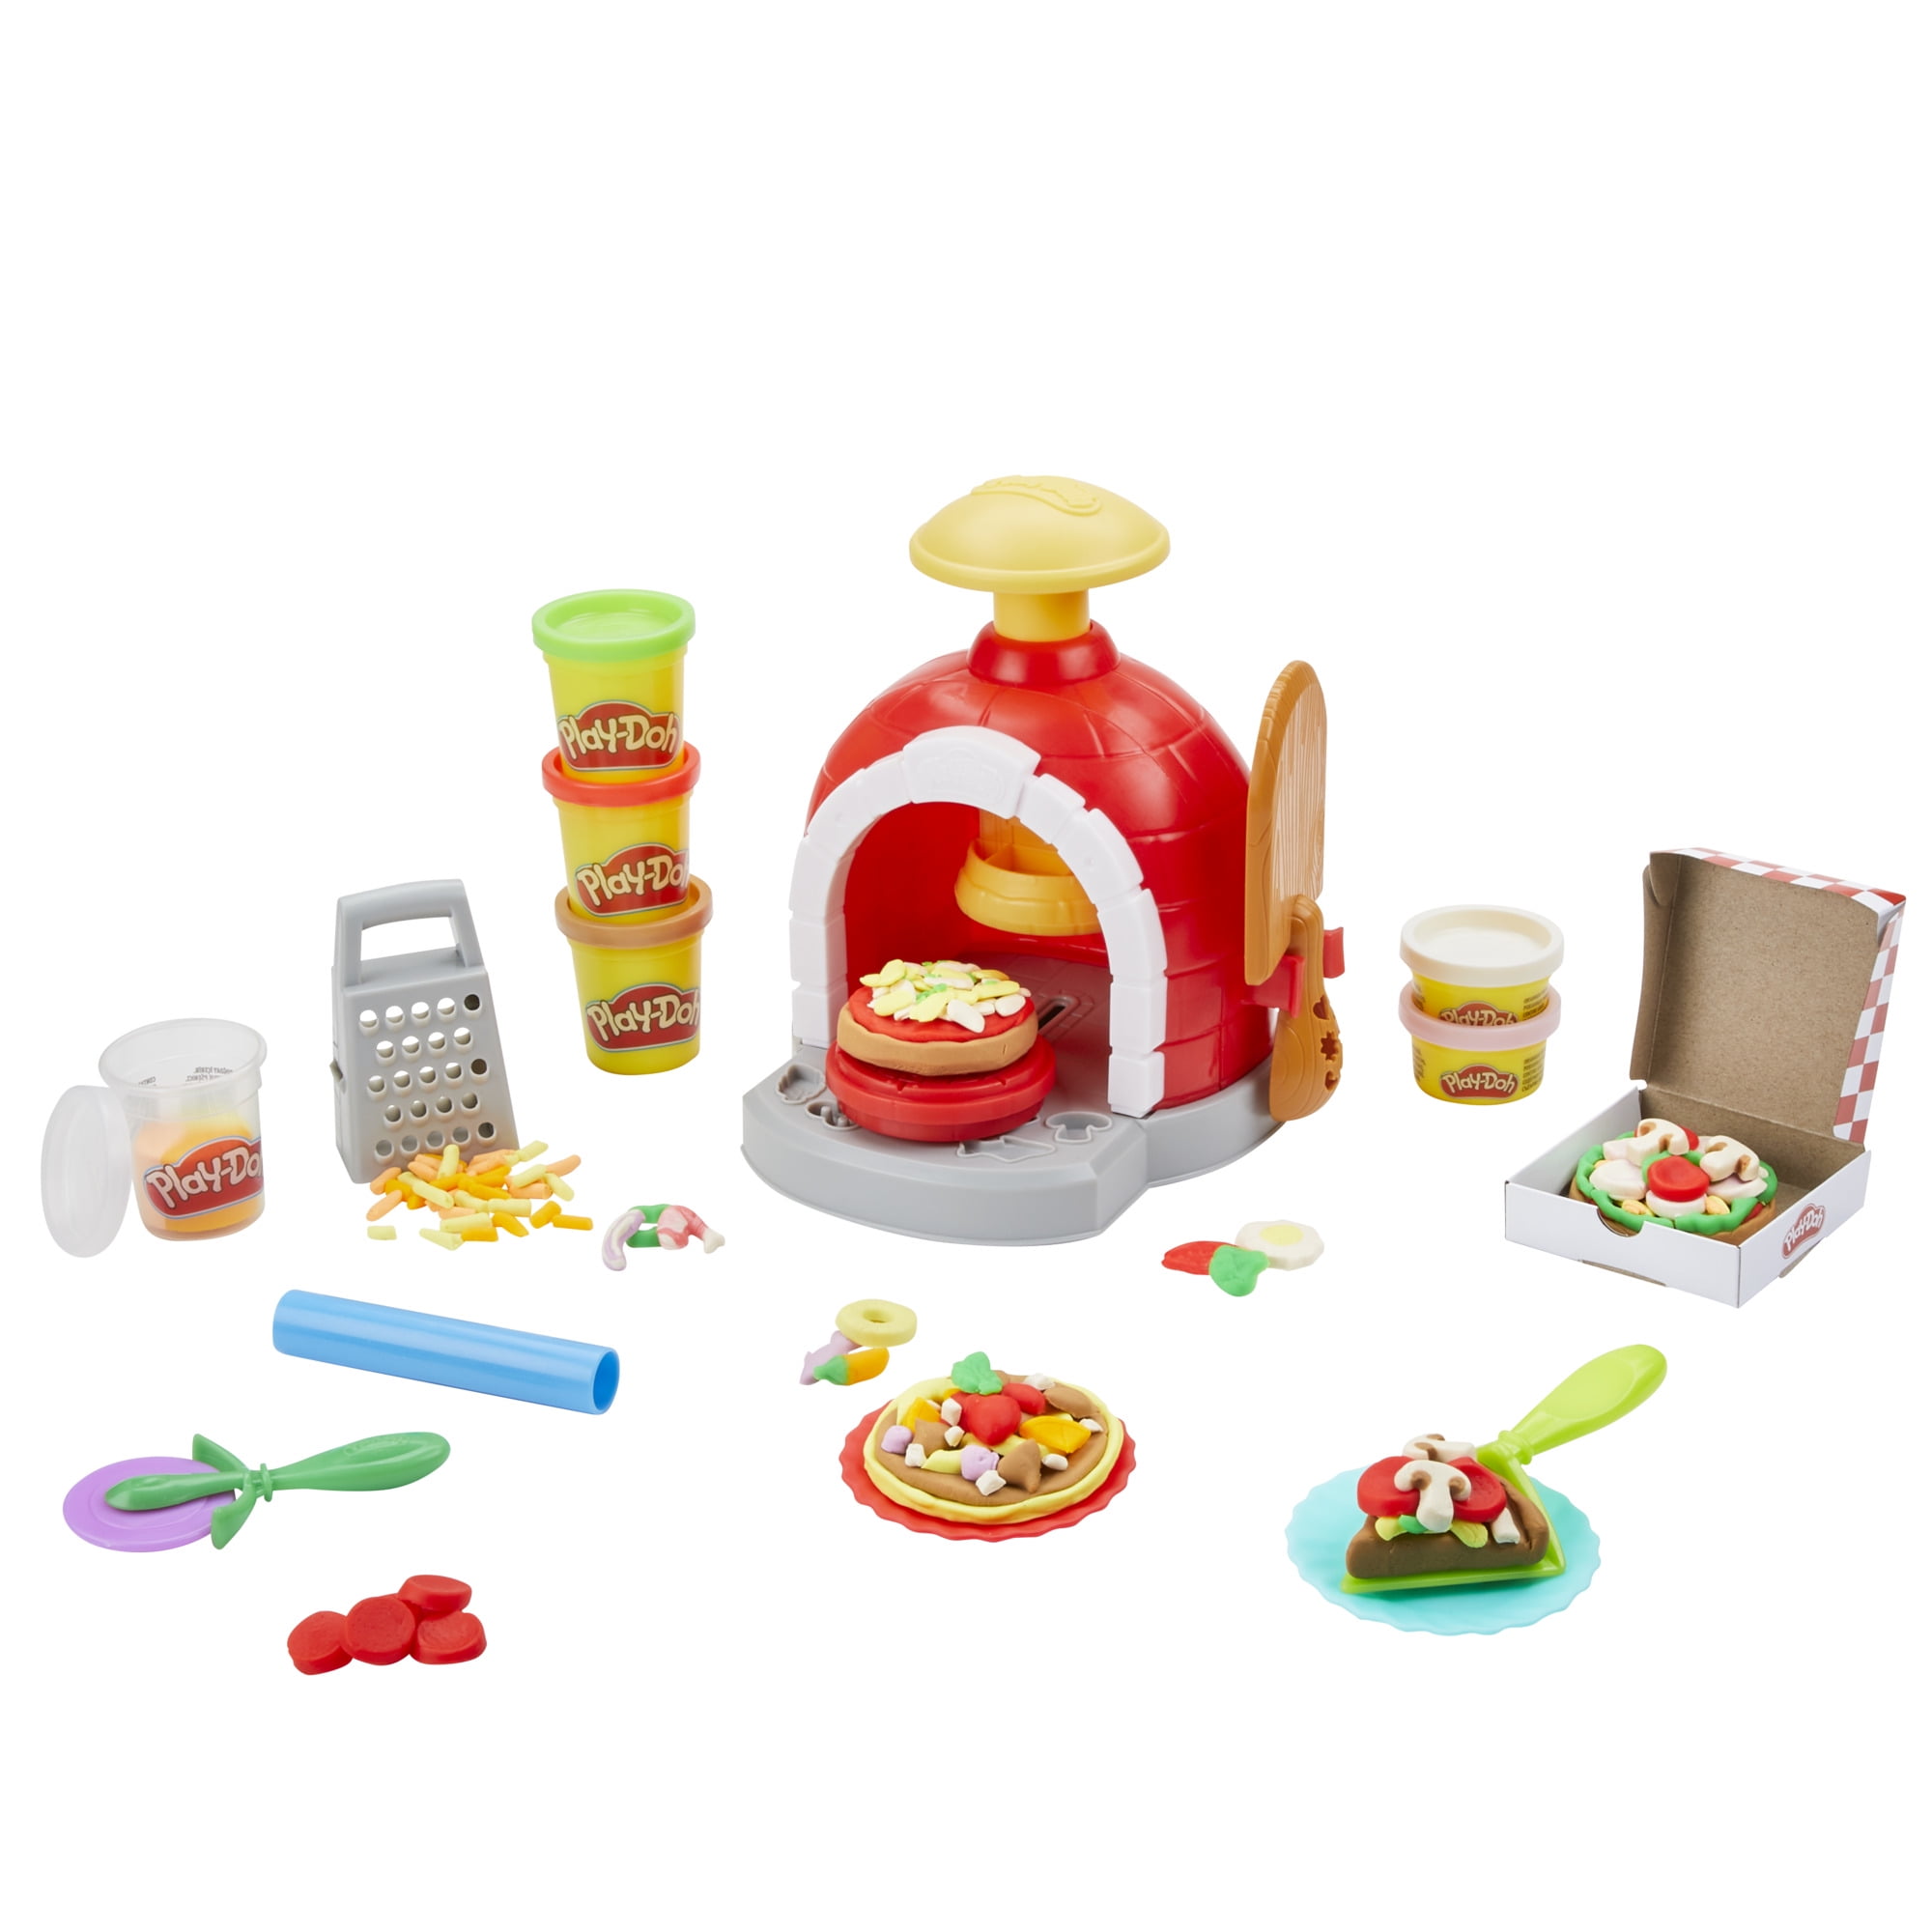 Play-Doh Kitchen Creations Pizza Oven Playset, Play Food Toy for